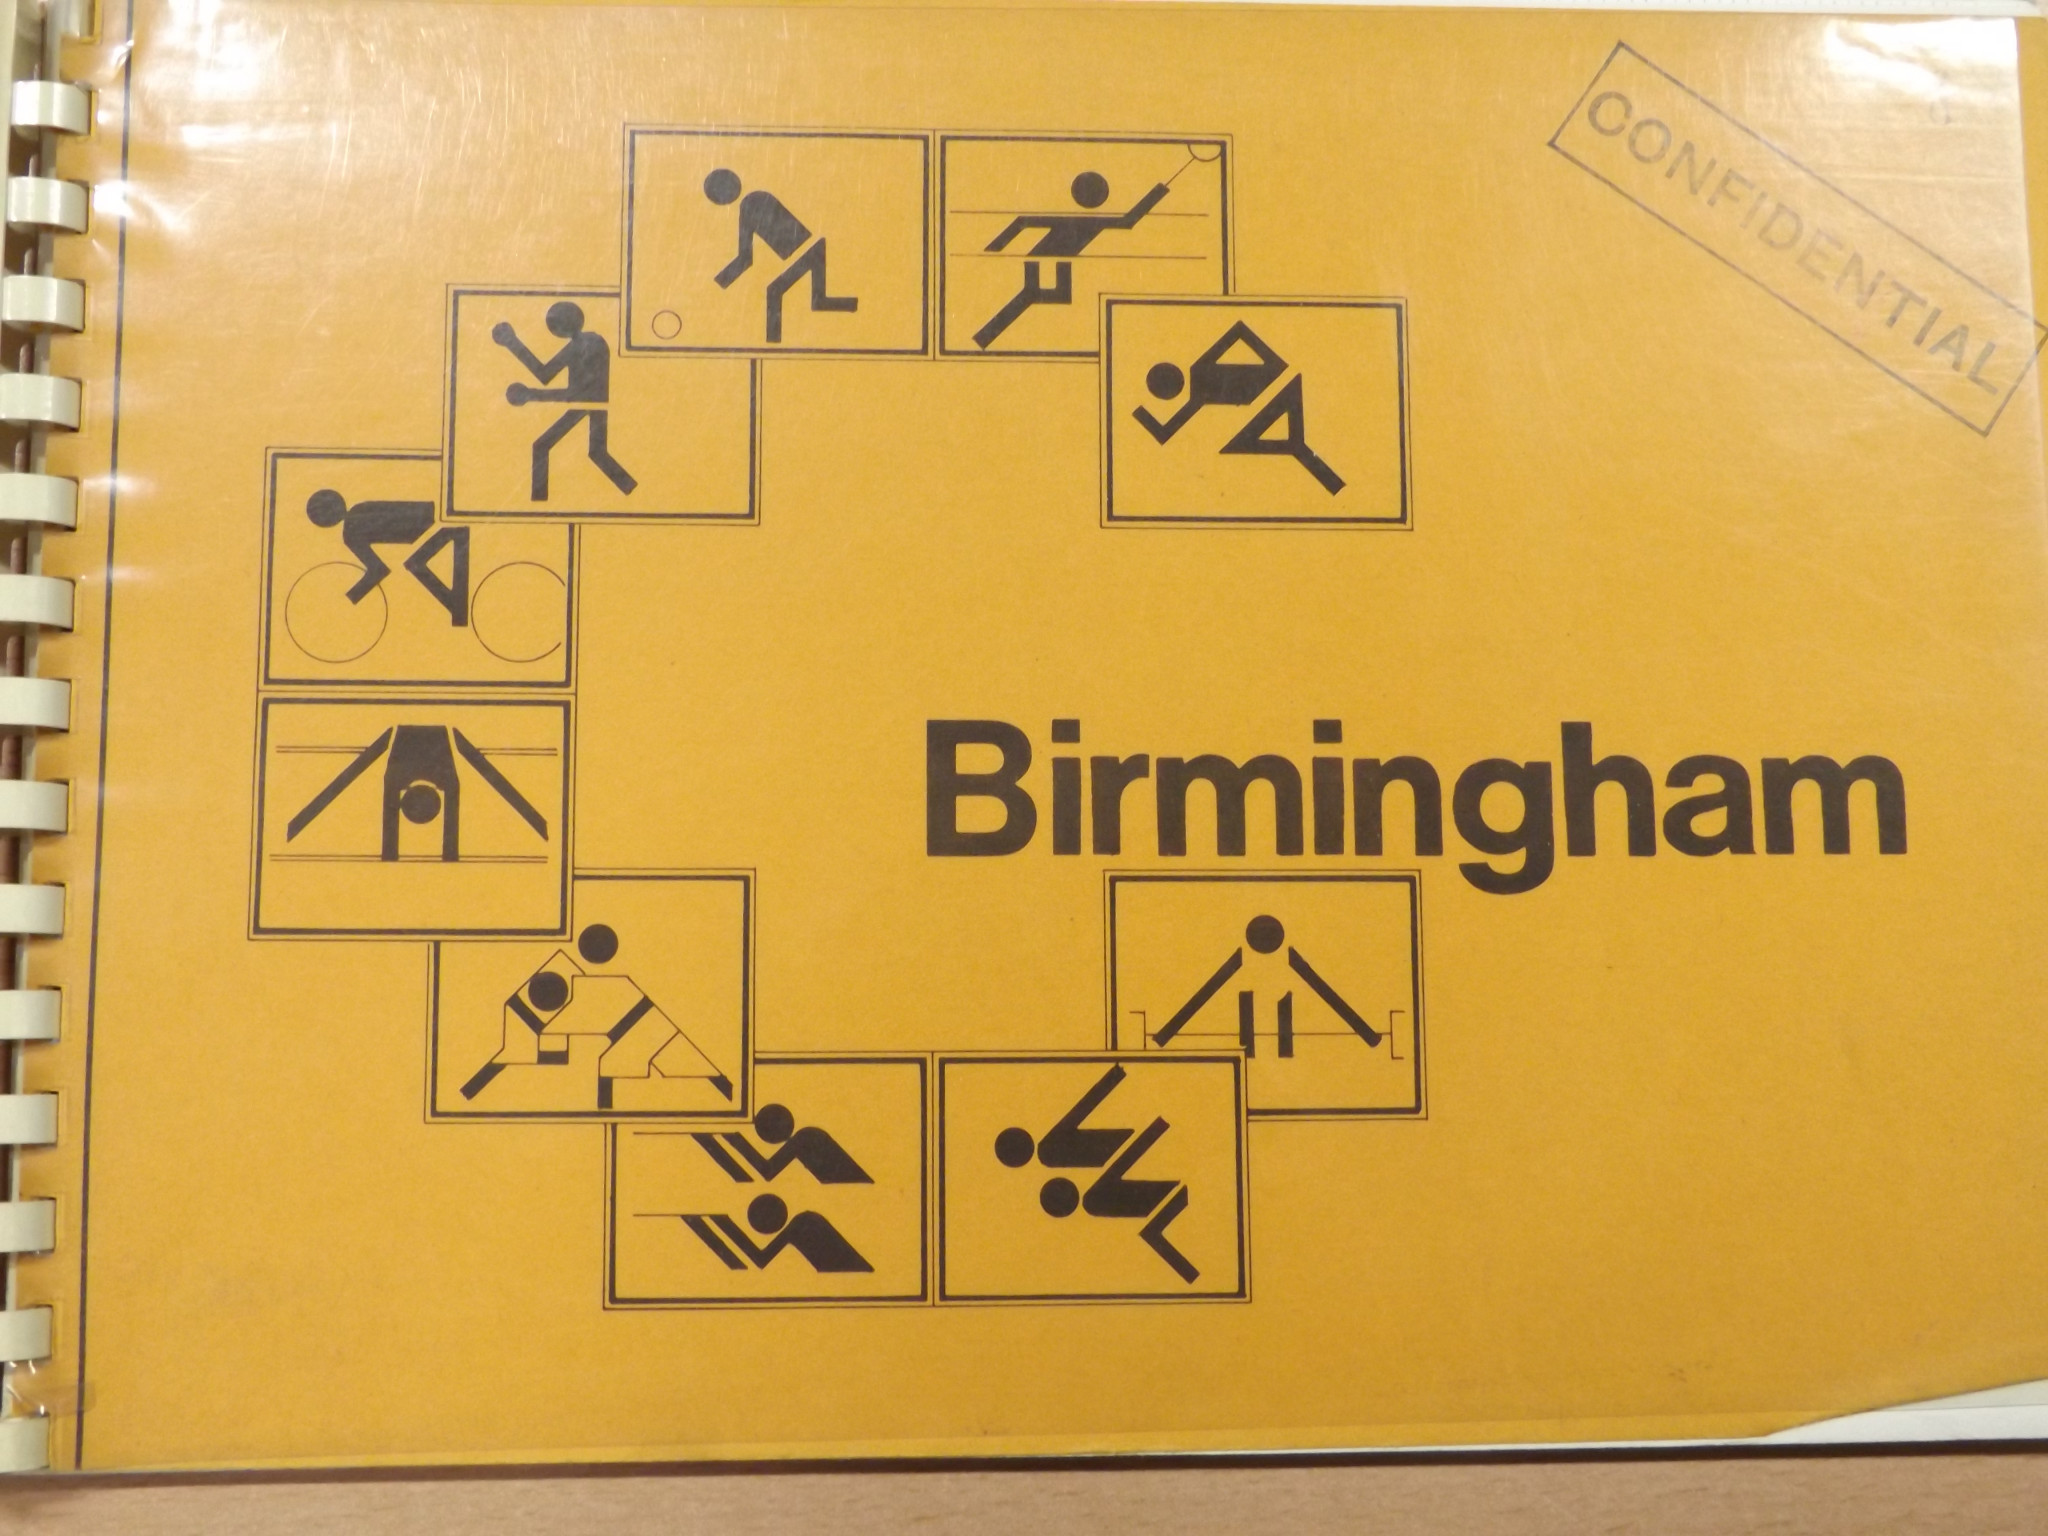 The cover of the initial dossier for Birmingham's bid ©Philip Barker